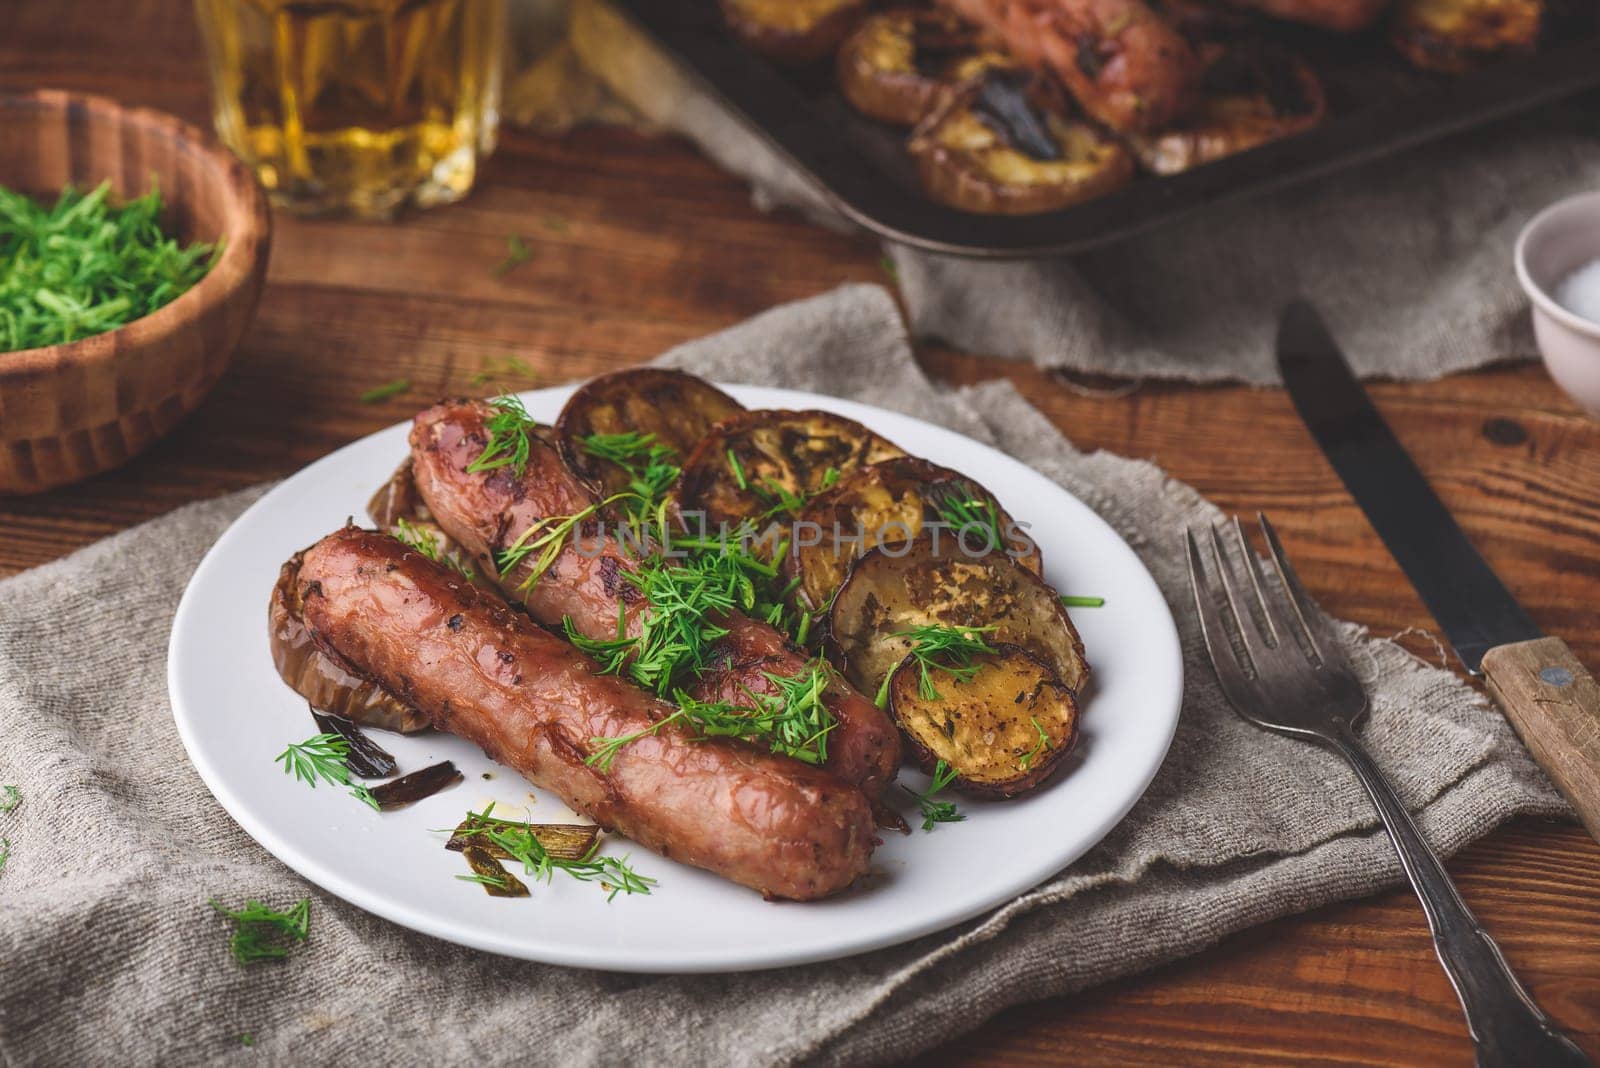 Baked Pork Sausages with Eggplant and Leek on White Plate Garnished with Fresh Herbs by Seva_blsv